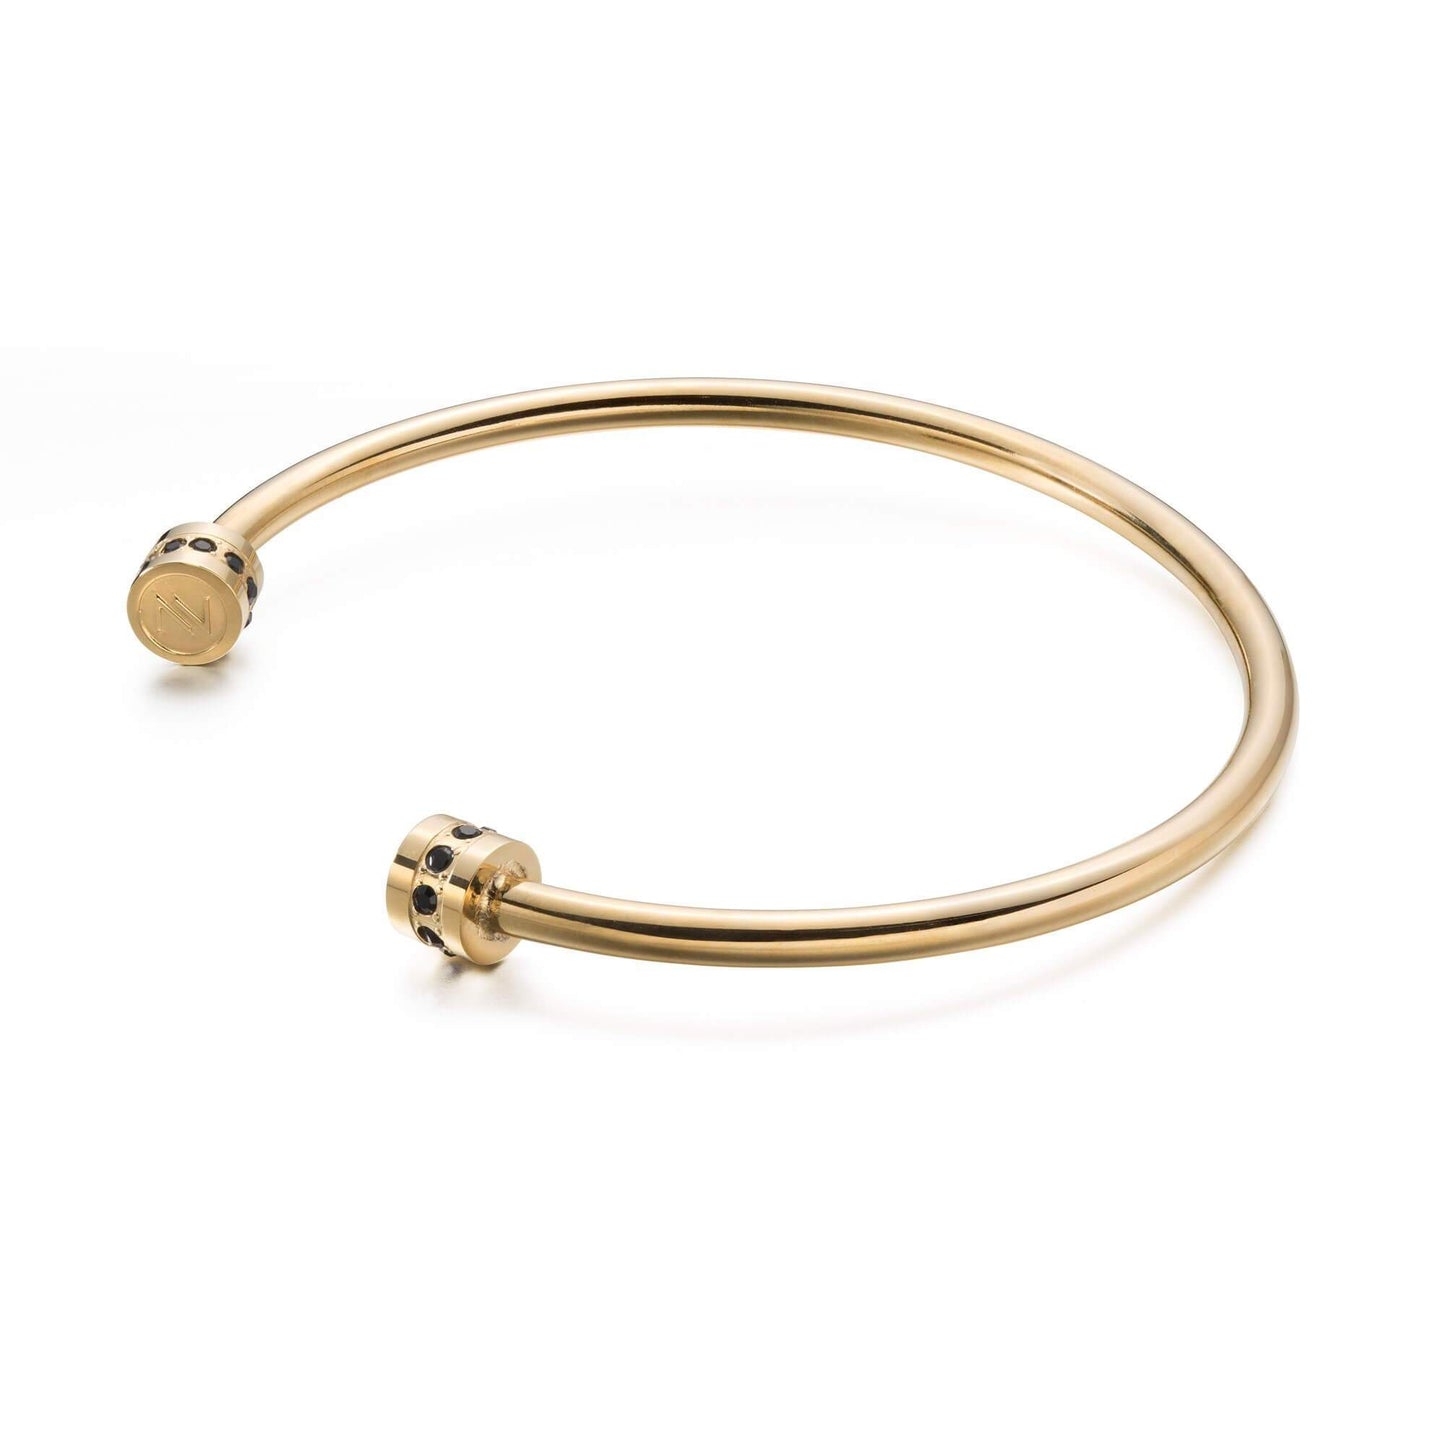 The classic Z bangle - Gold